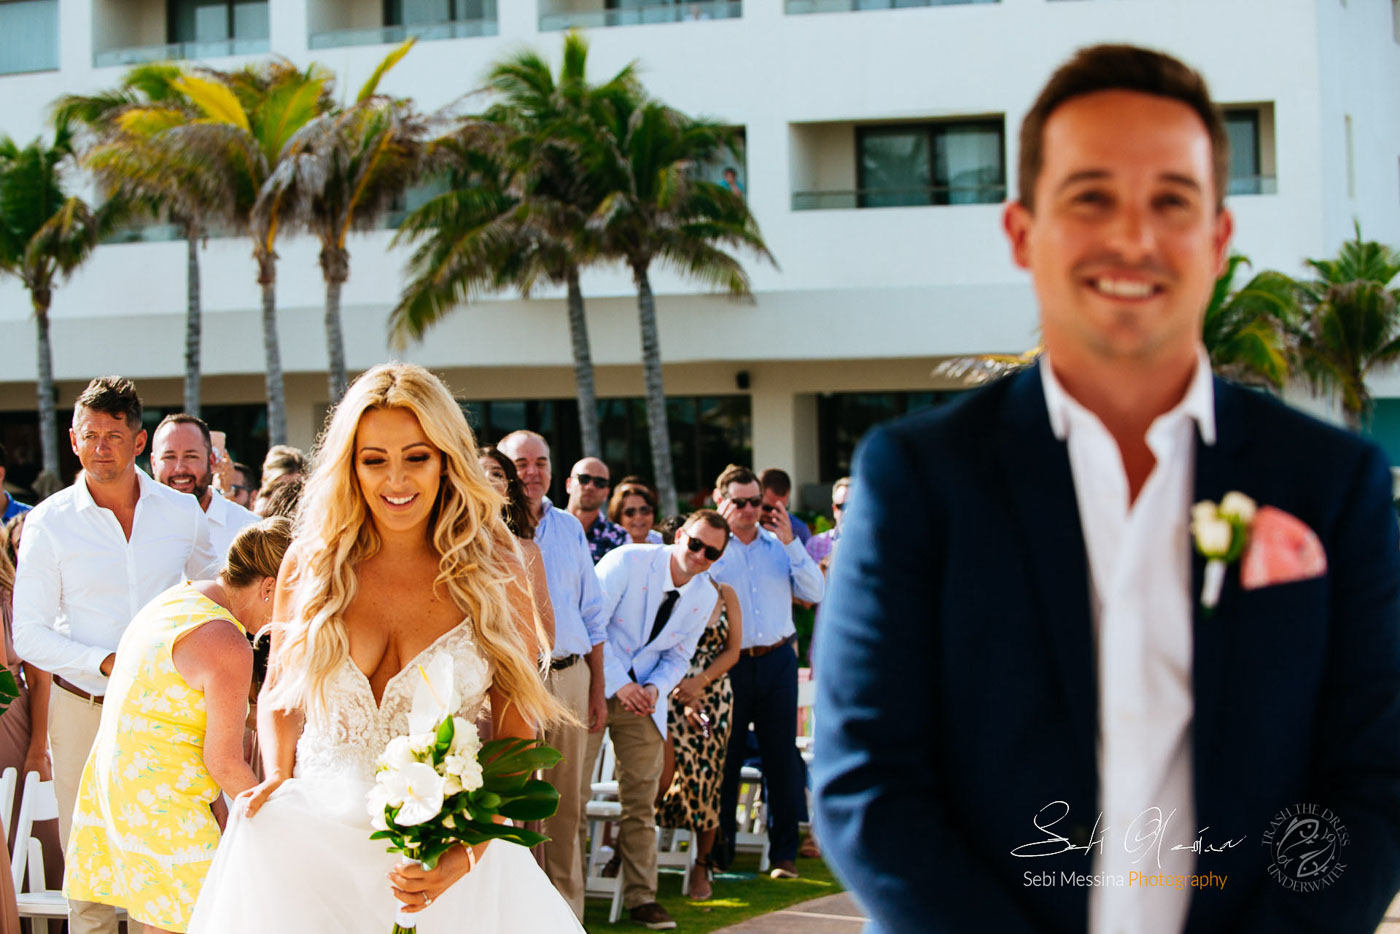 First look at a destination wedding in Cancun Mexico – Sebi Messina Photography